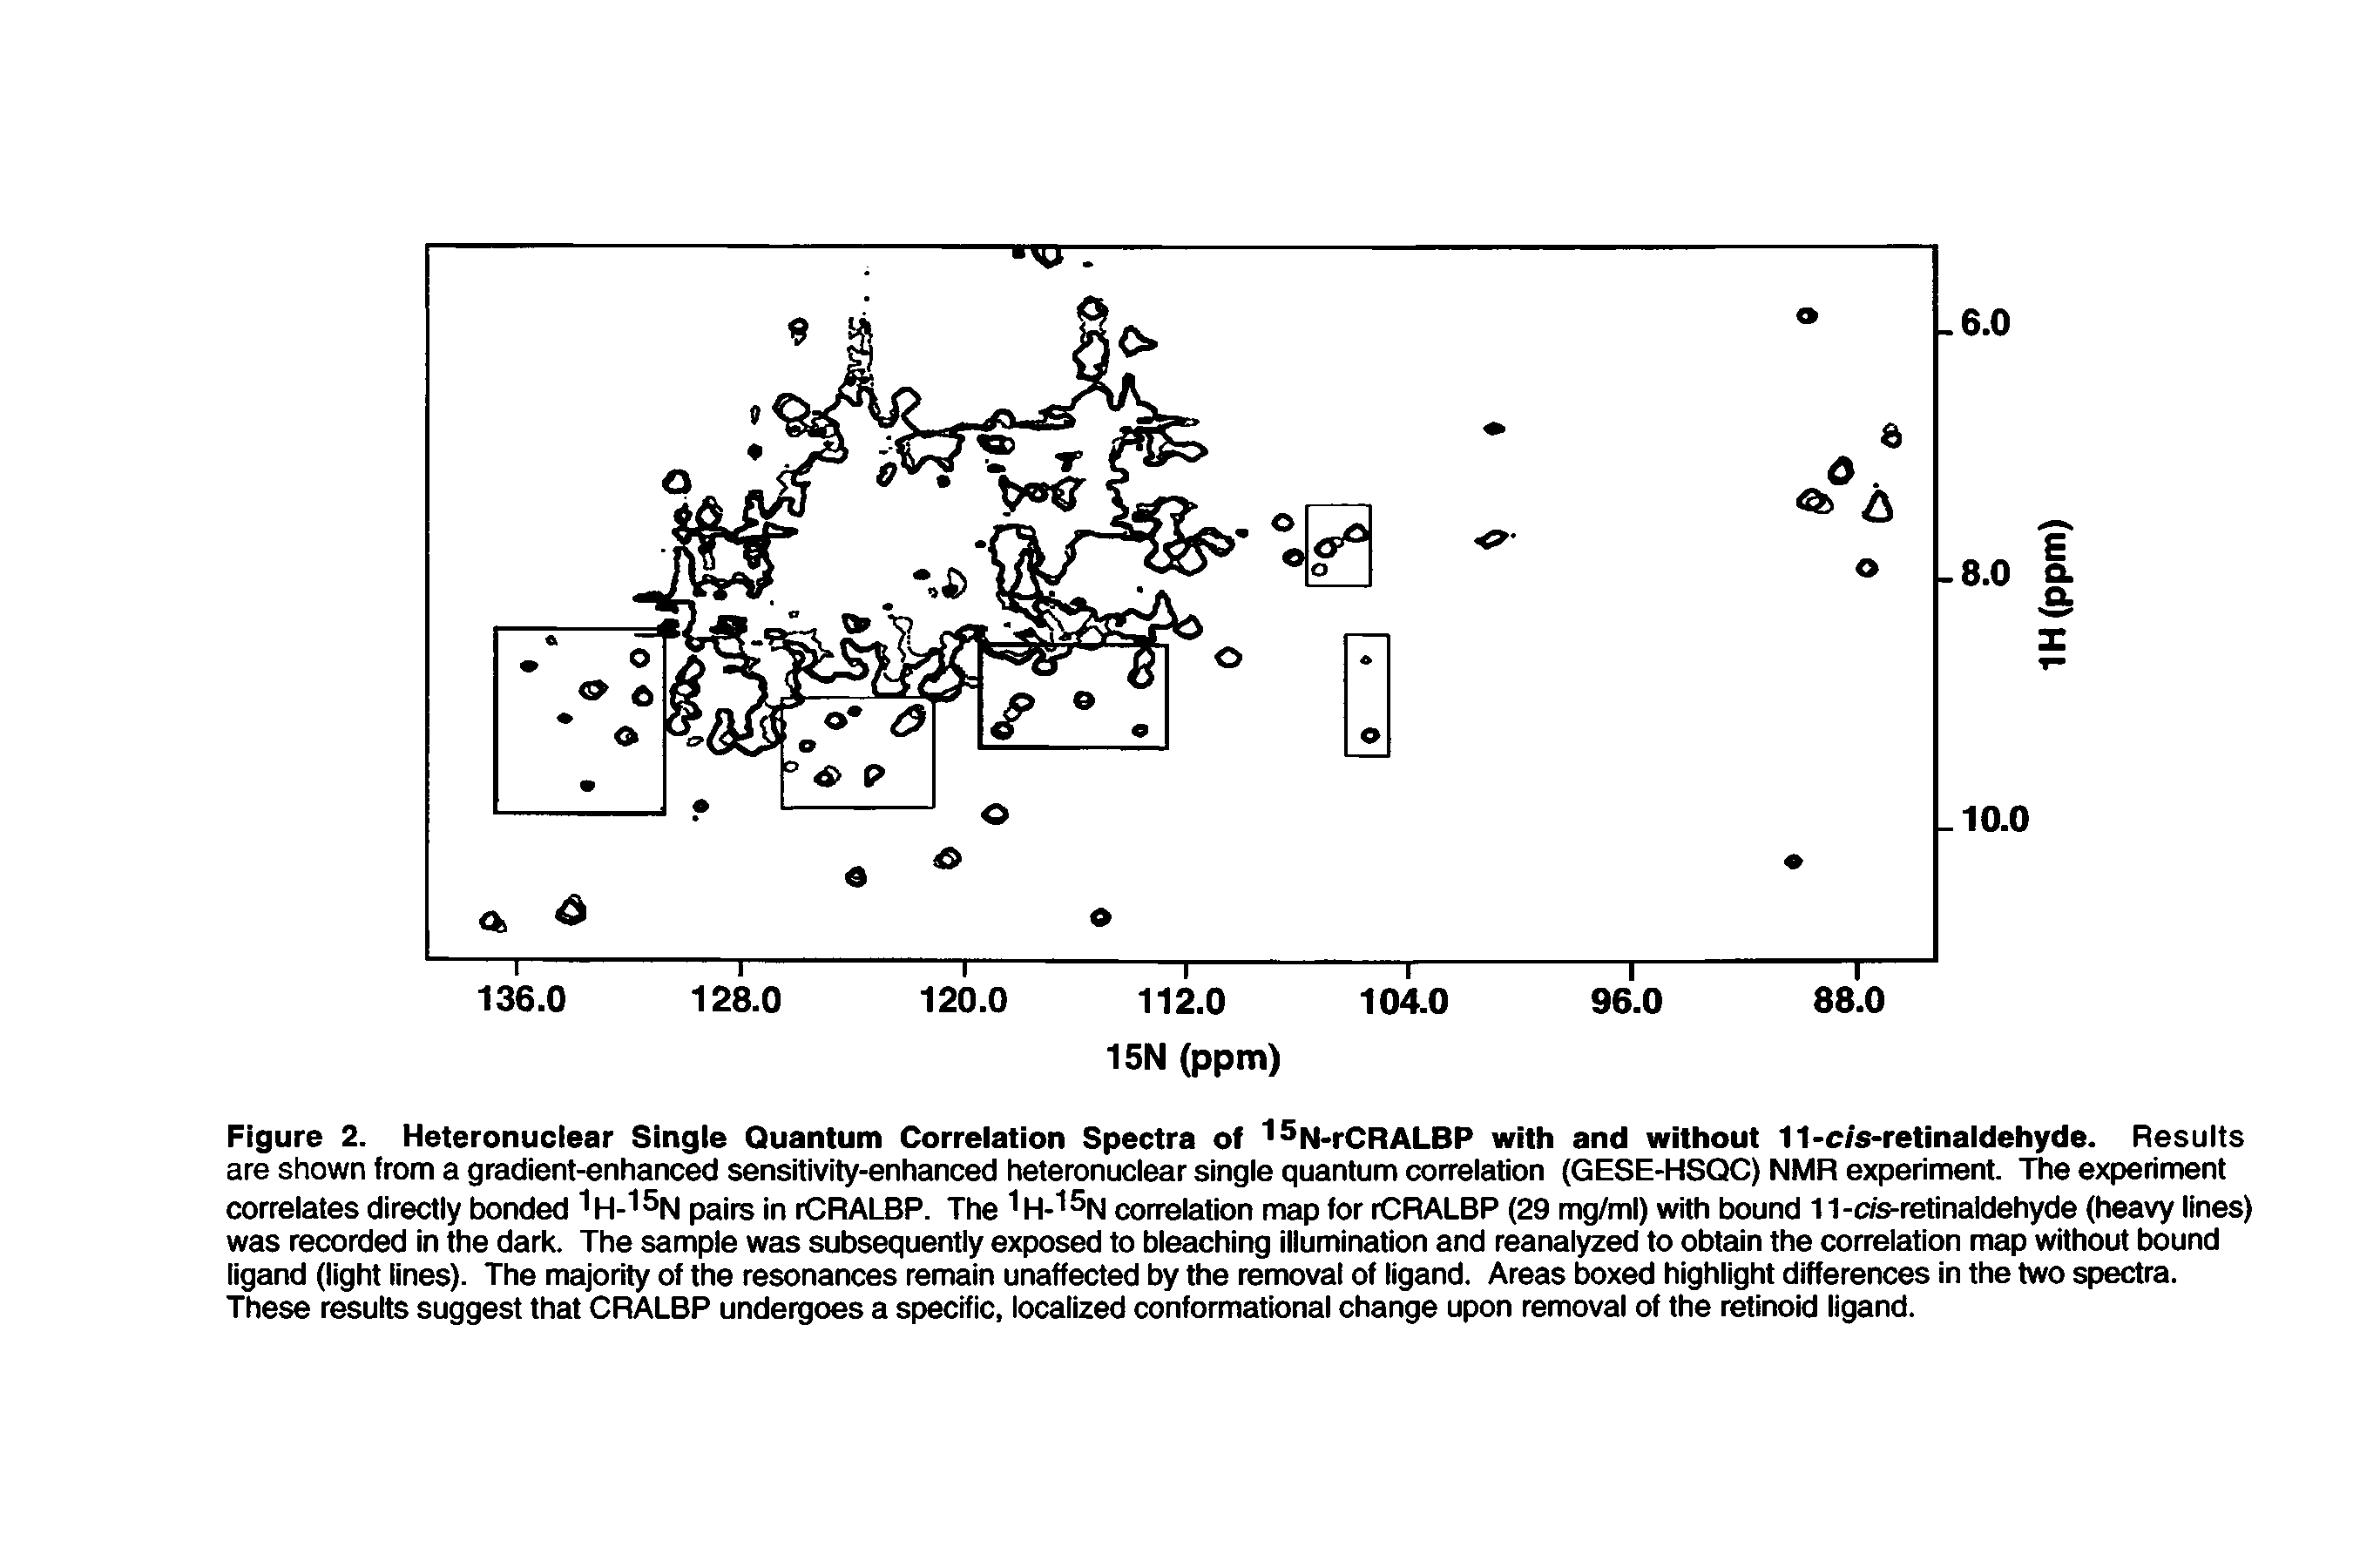 Figure 2. Heteronuclear Single Quantum Correlation Spectra of I N-rCRALBP with and without 11-c/s-retinaldehyde. Results are shown from a gradient-enhanced sensitivity-enhanced heteronuclear single quantum correlation (GESE-HSQC) NMR experiment. The experiment correlates directly bonded pairs in rCRALBP. The correlation map for rCRALBP (29 mg/ml) with bound 11-c/s-retinaidehyde (heavy lines)...